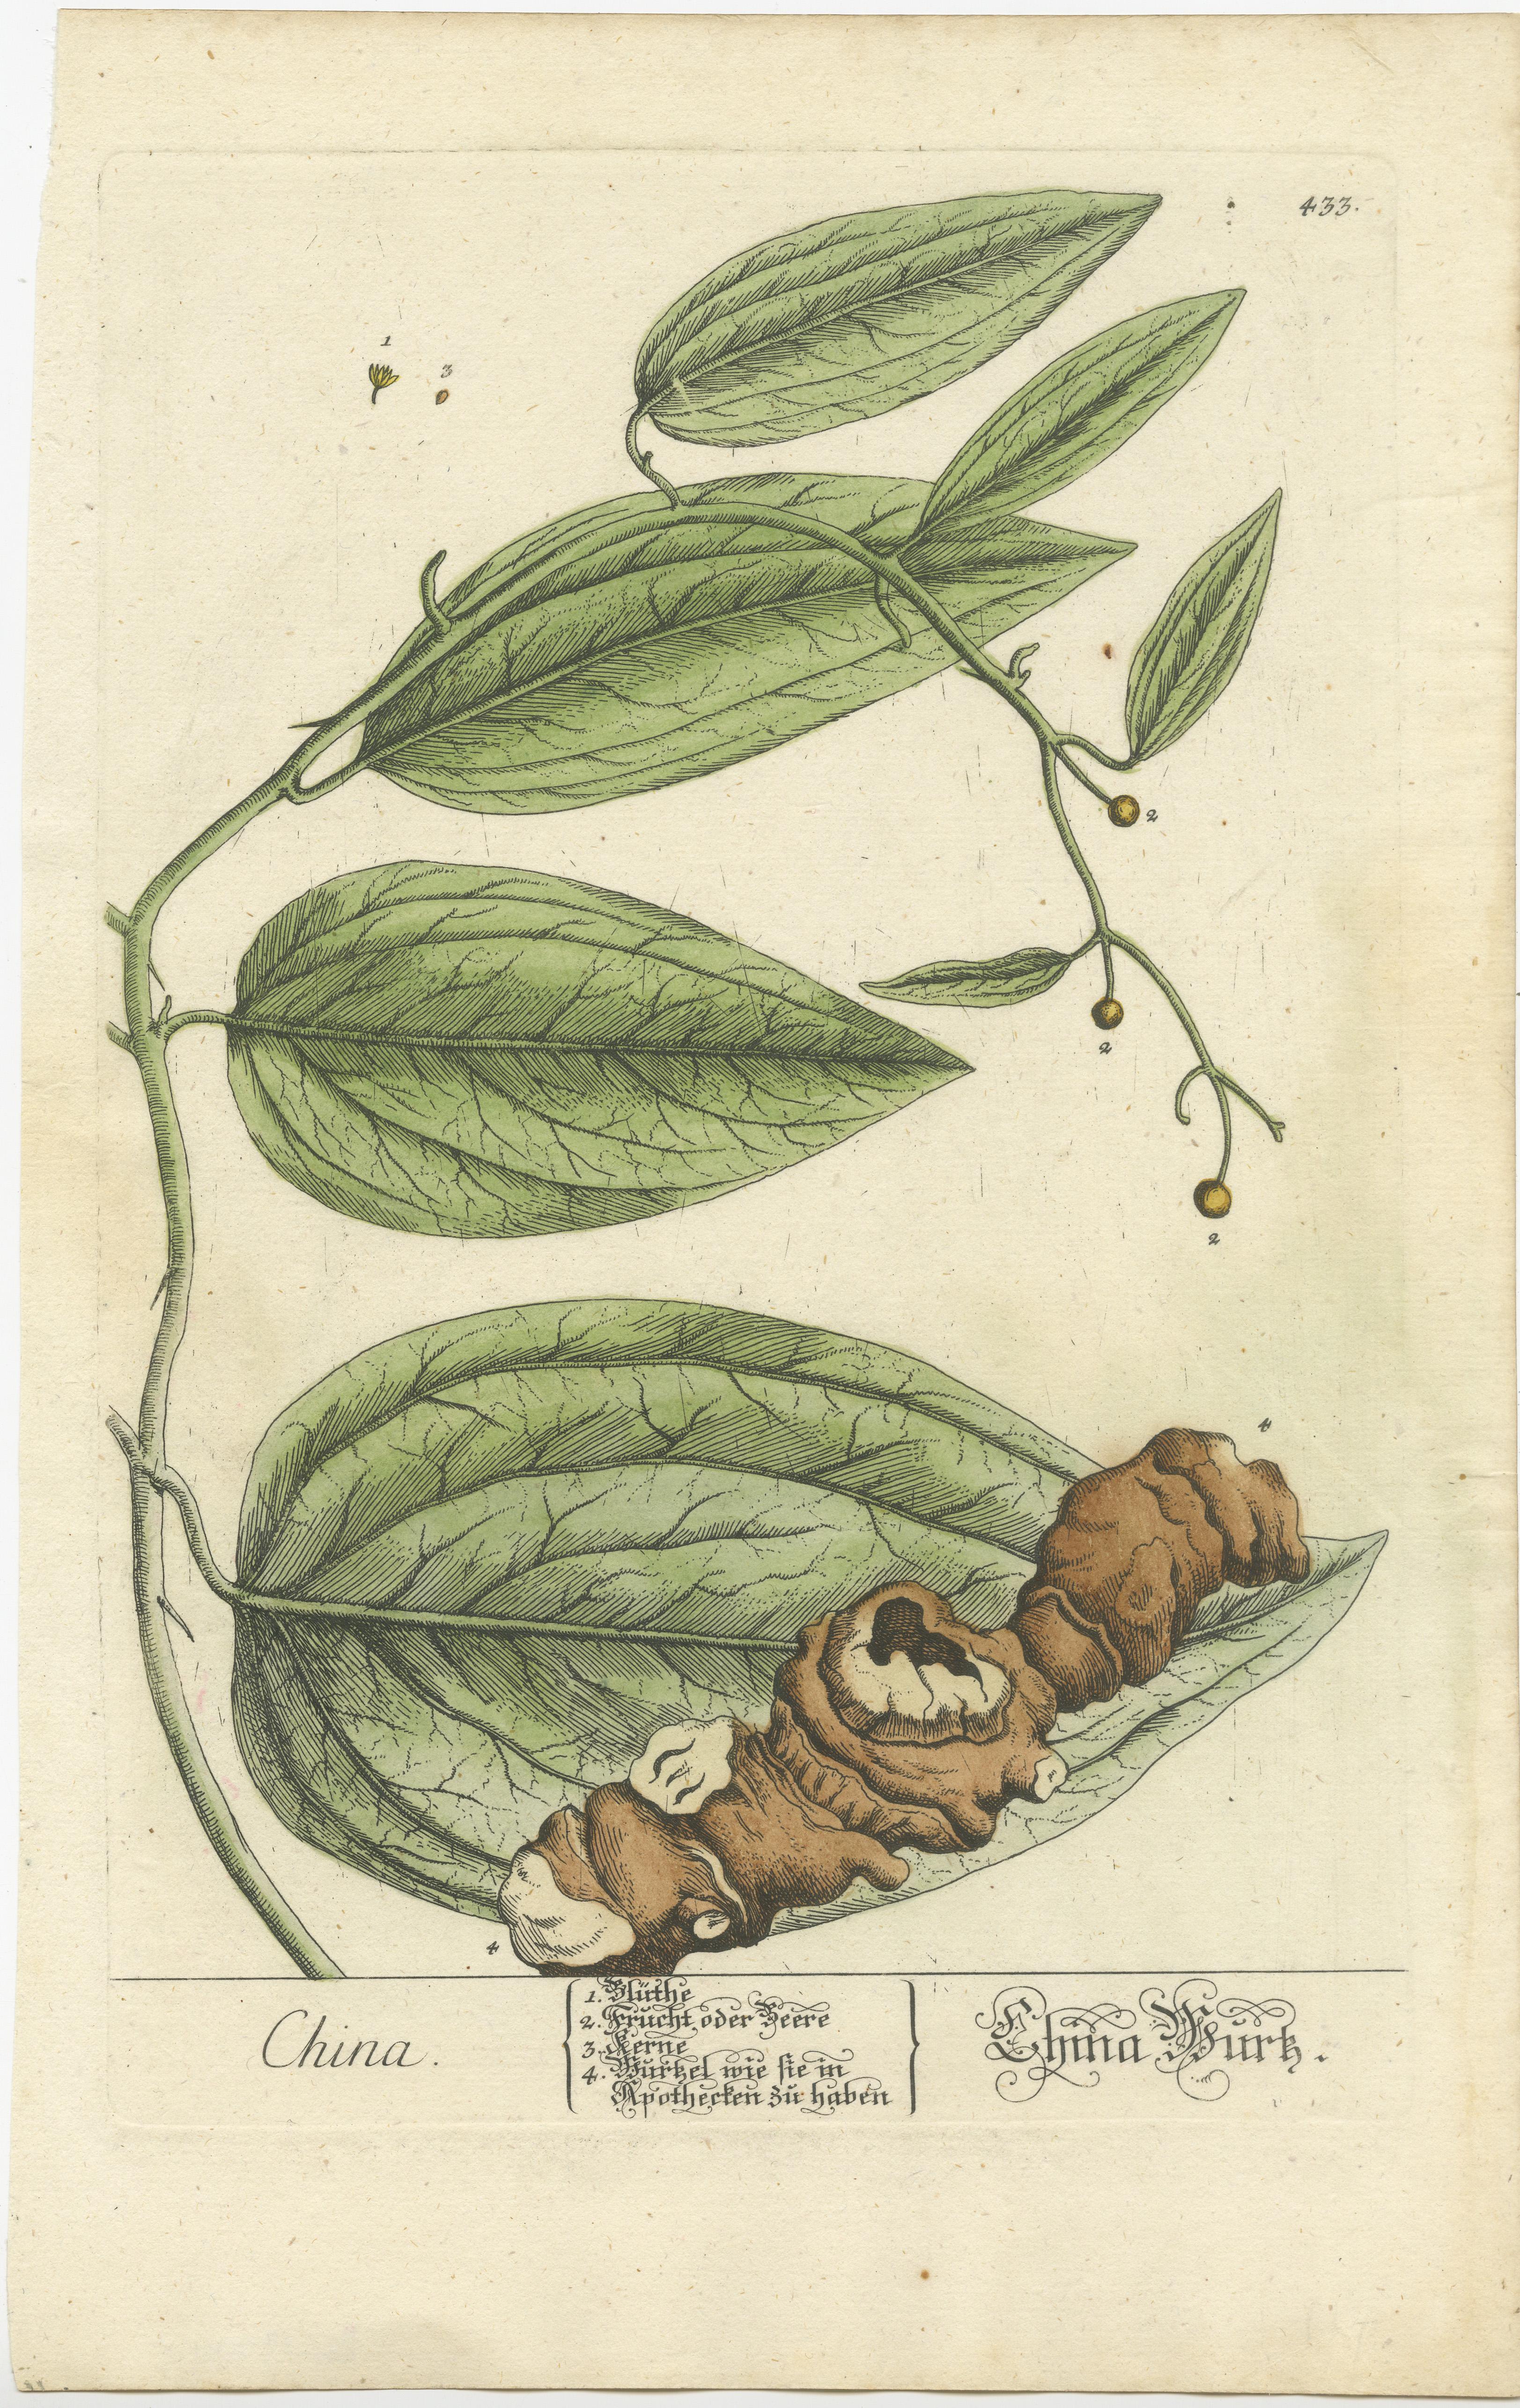 Antique print titled 'China'. Botanical print of chinaroot. Published by or after Elisabeth Blackwell, circa 1750. 